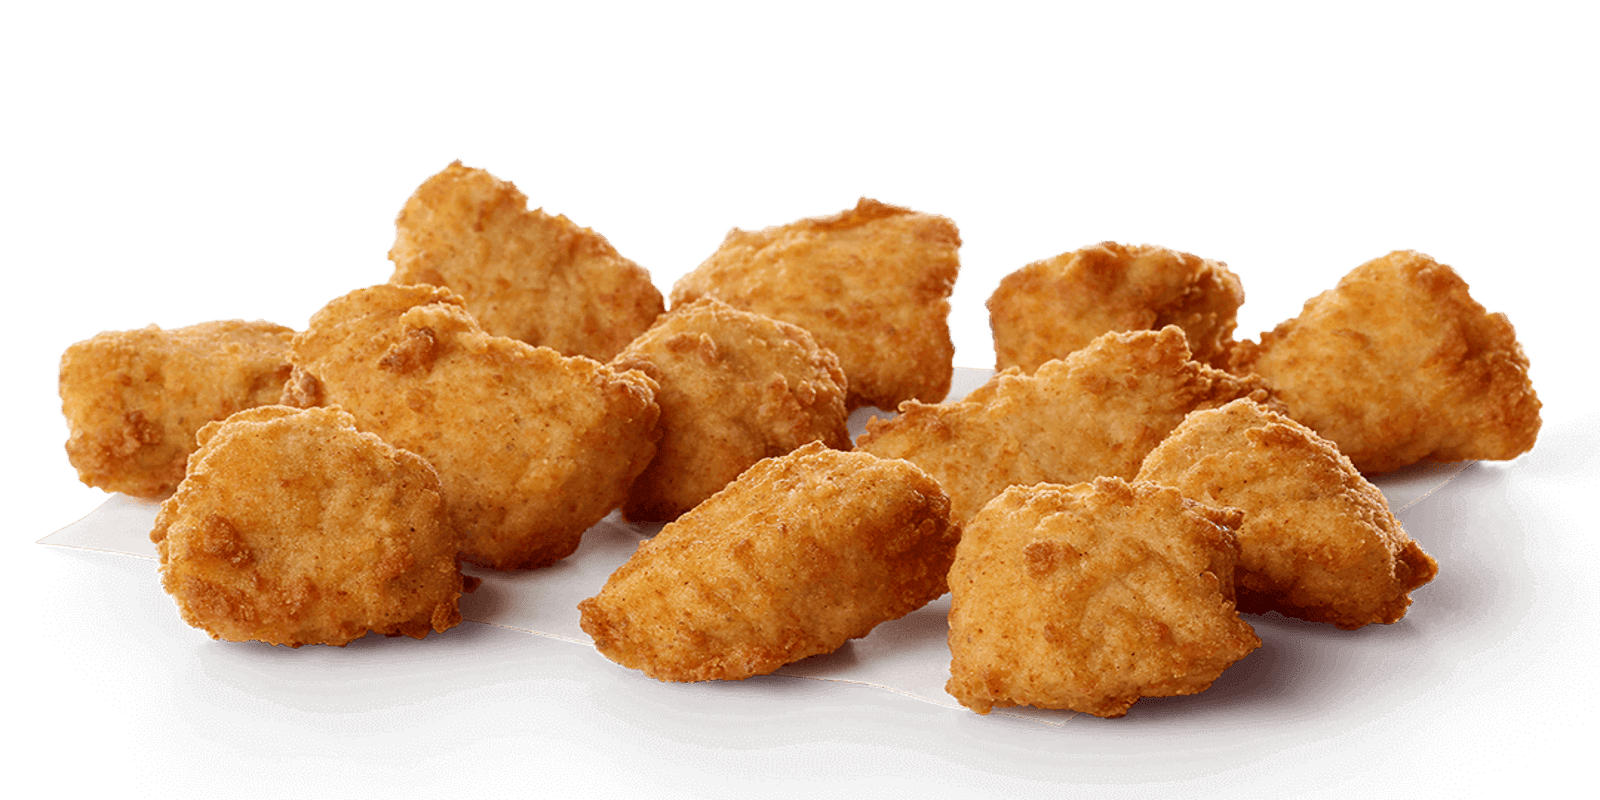 ChickfilA giving away free chicken nuggets this month